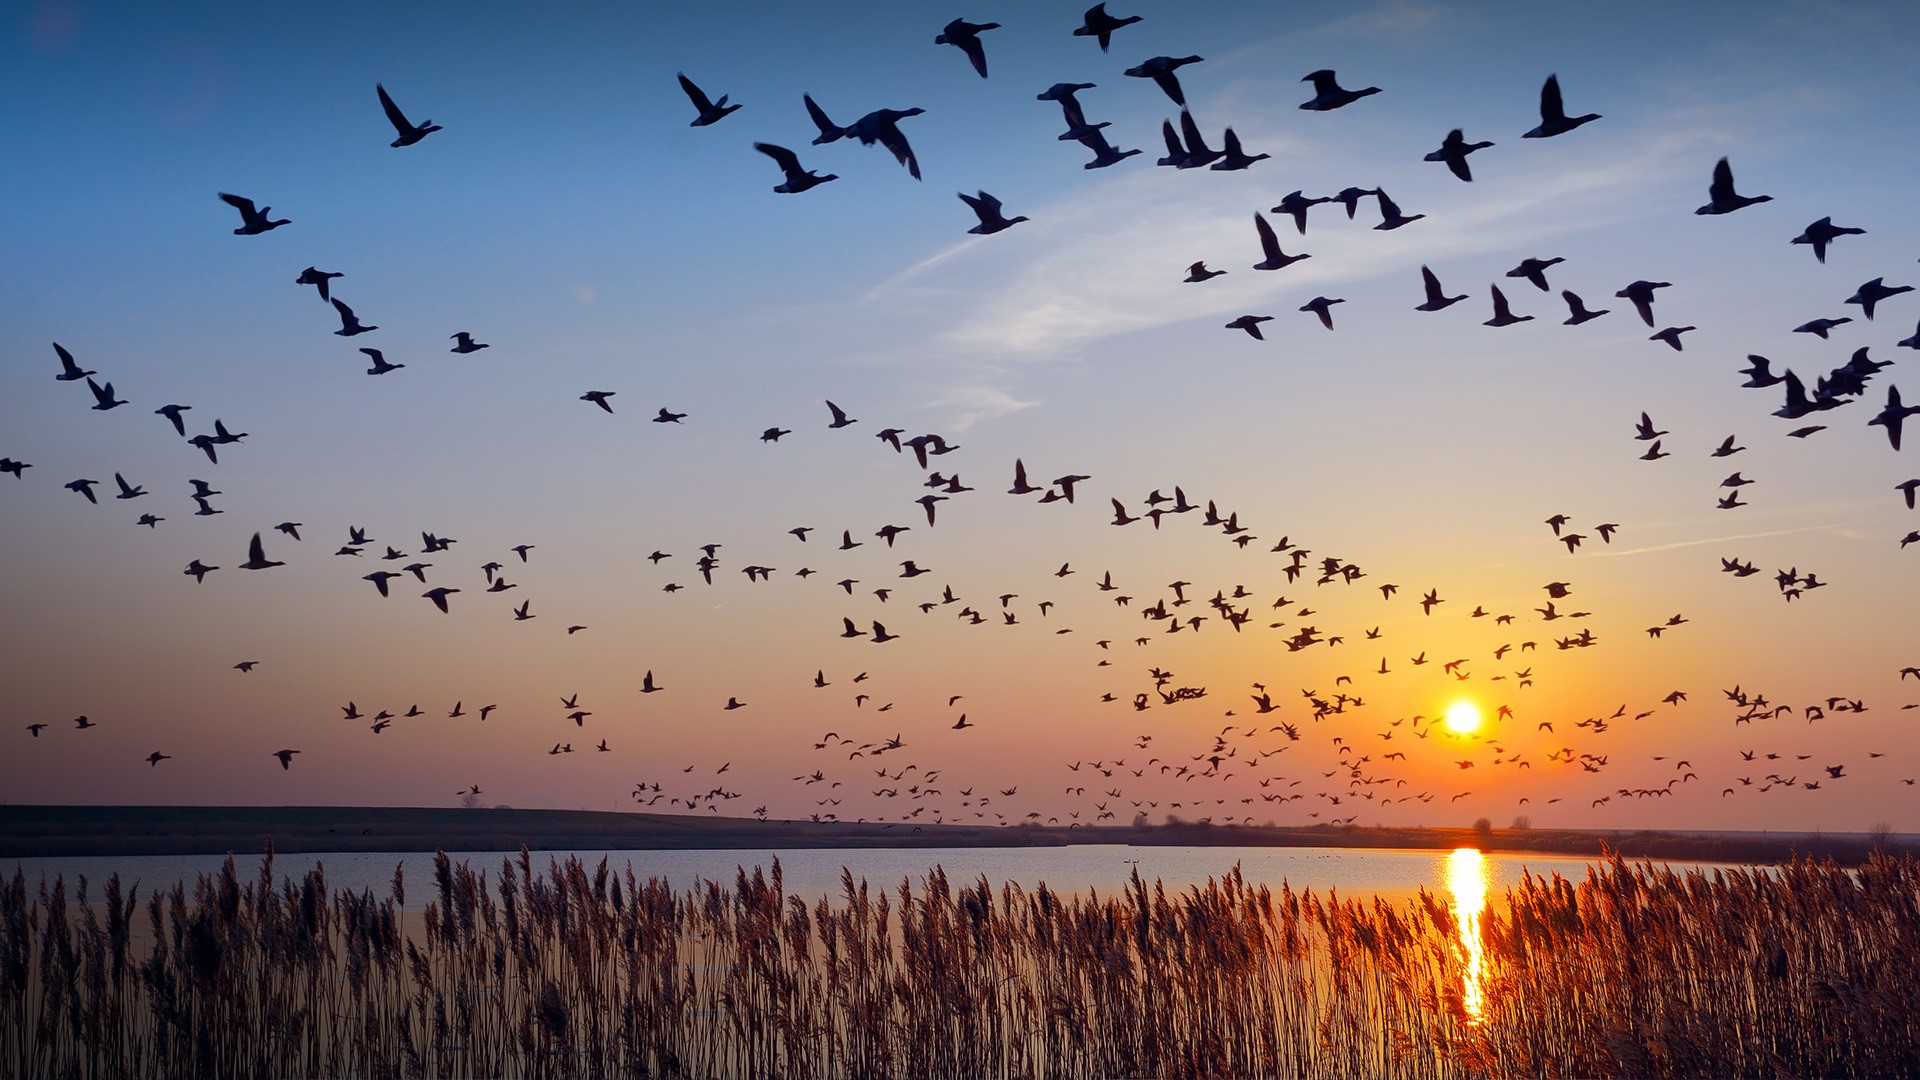 General 1920x1080 nature landscape birds lake Sun sunset sky clouds barnacles Germany